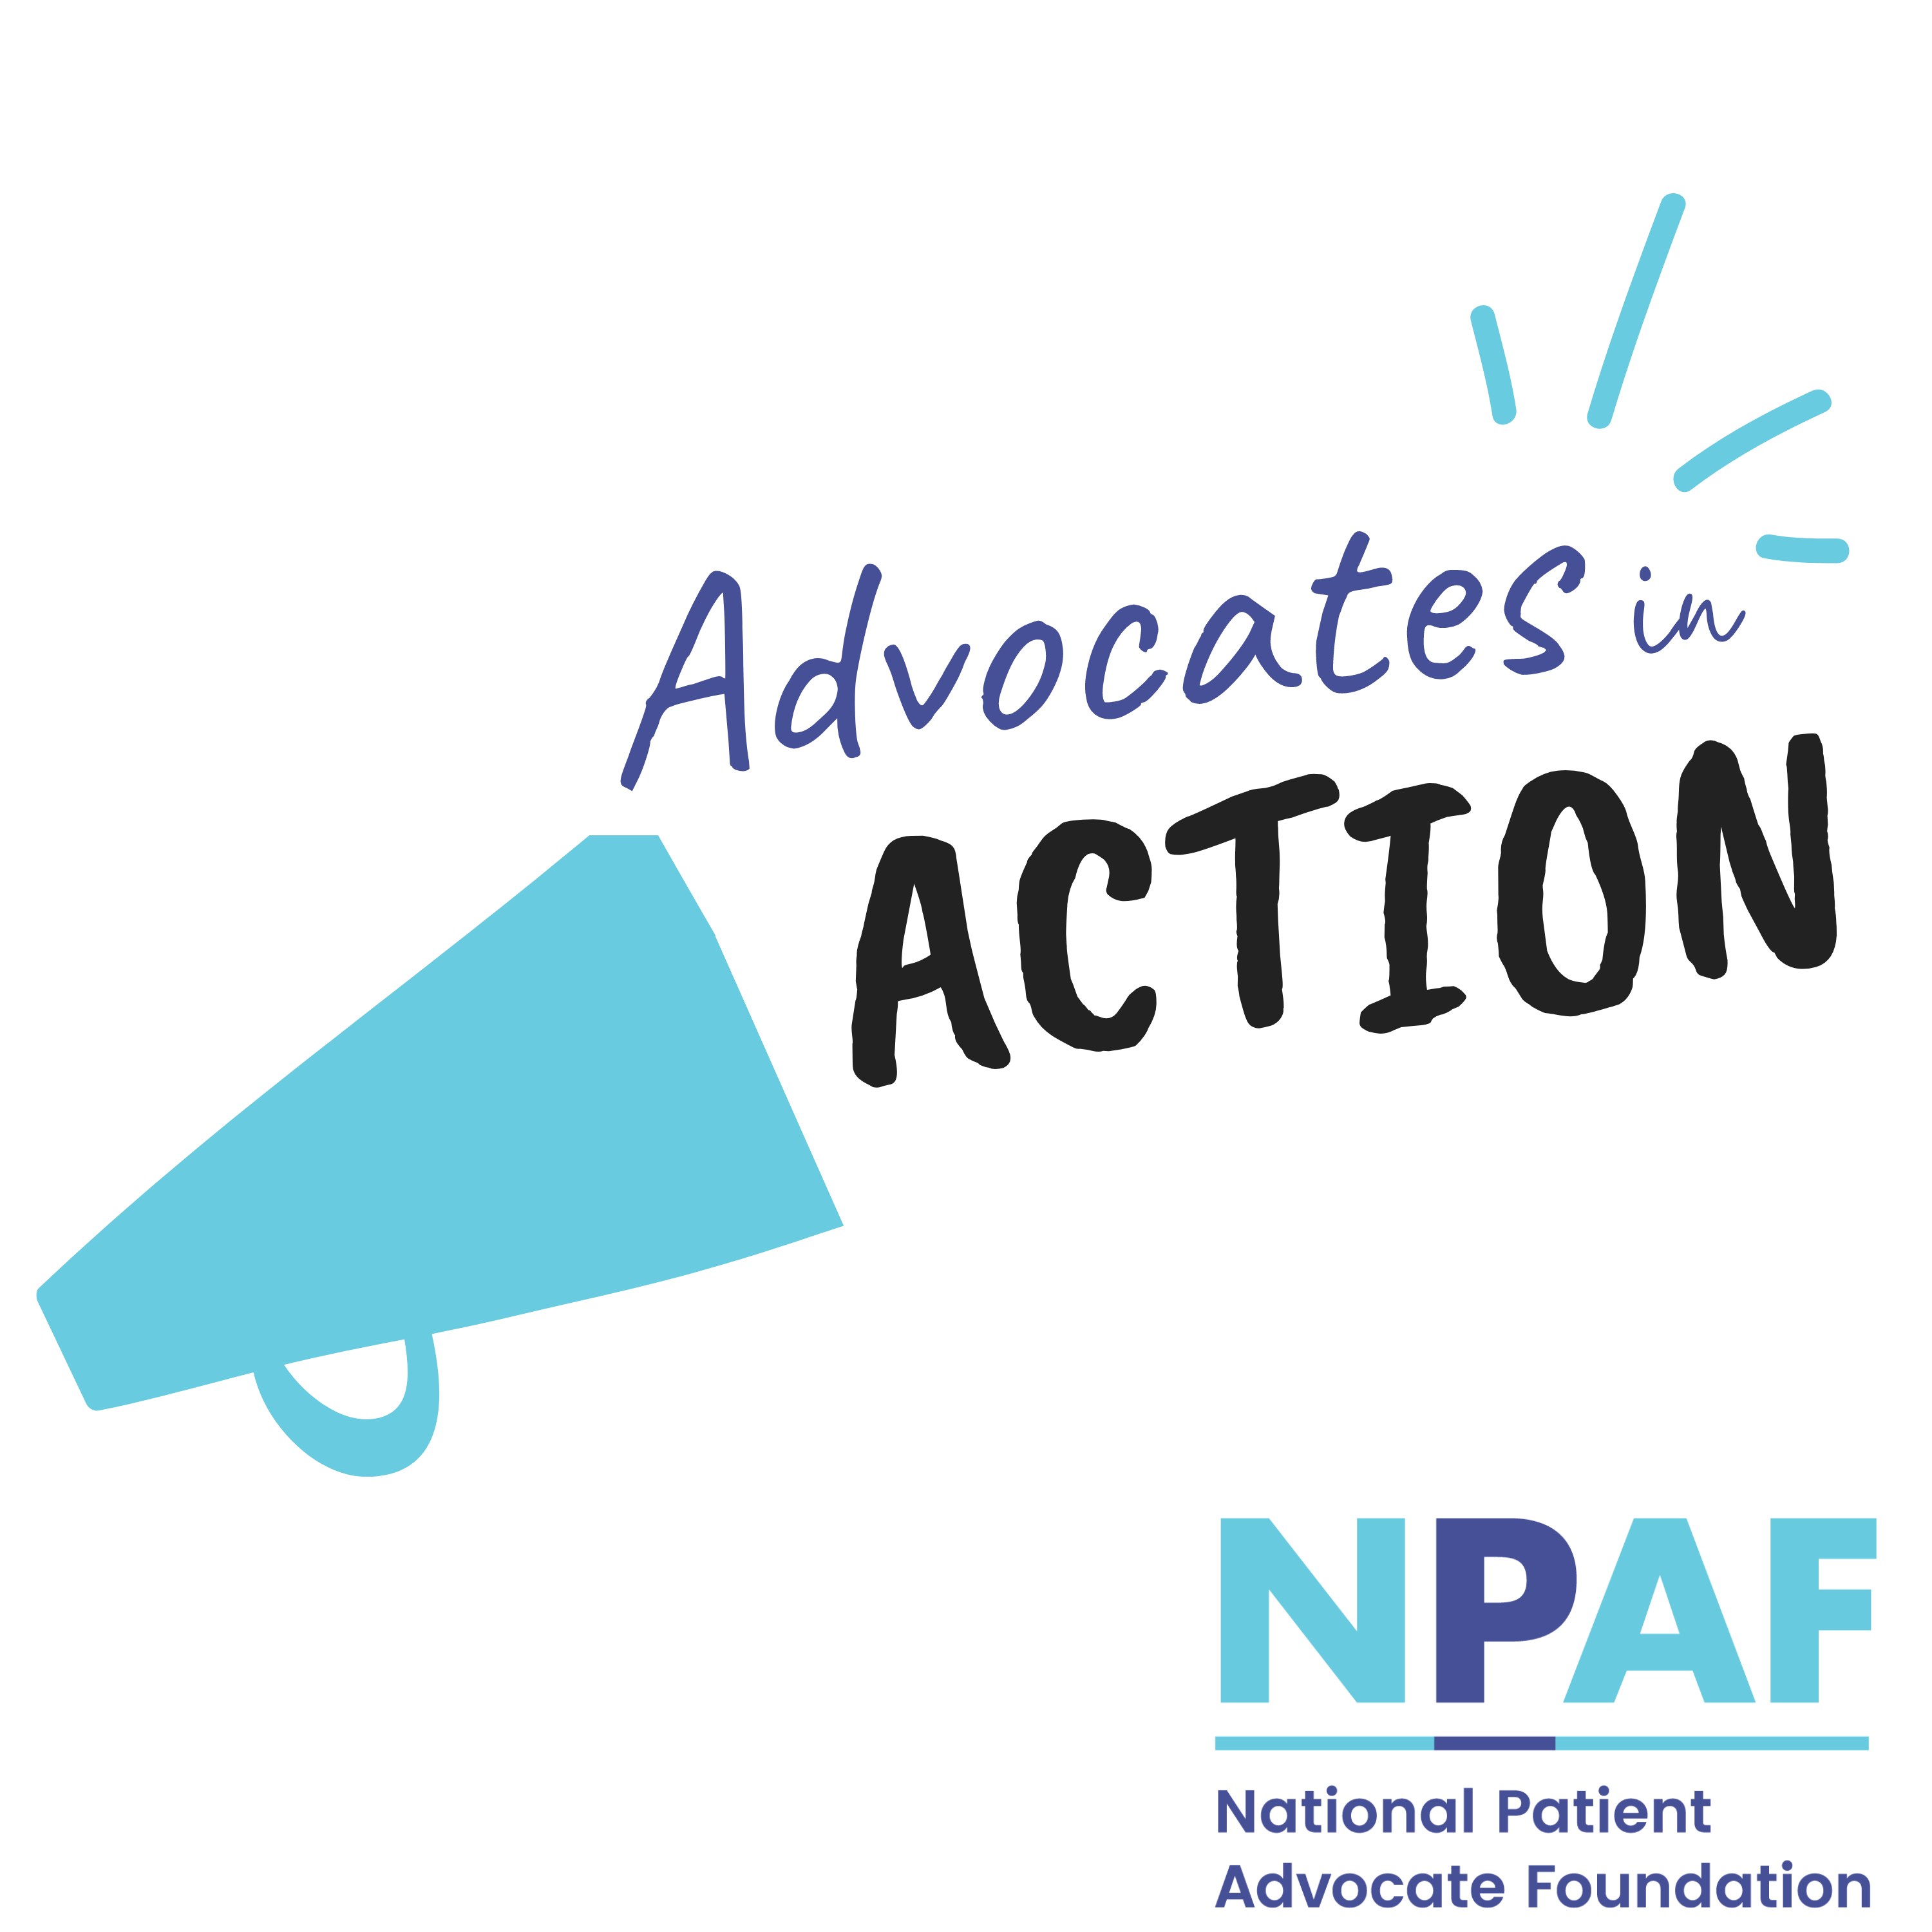 Welcome to Advocates in Action by the National Patient Advocate Foundation